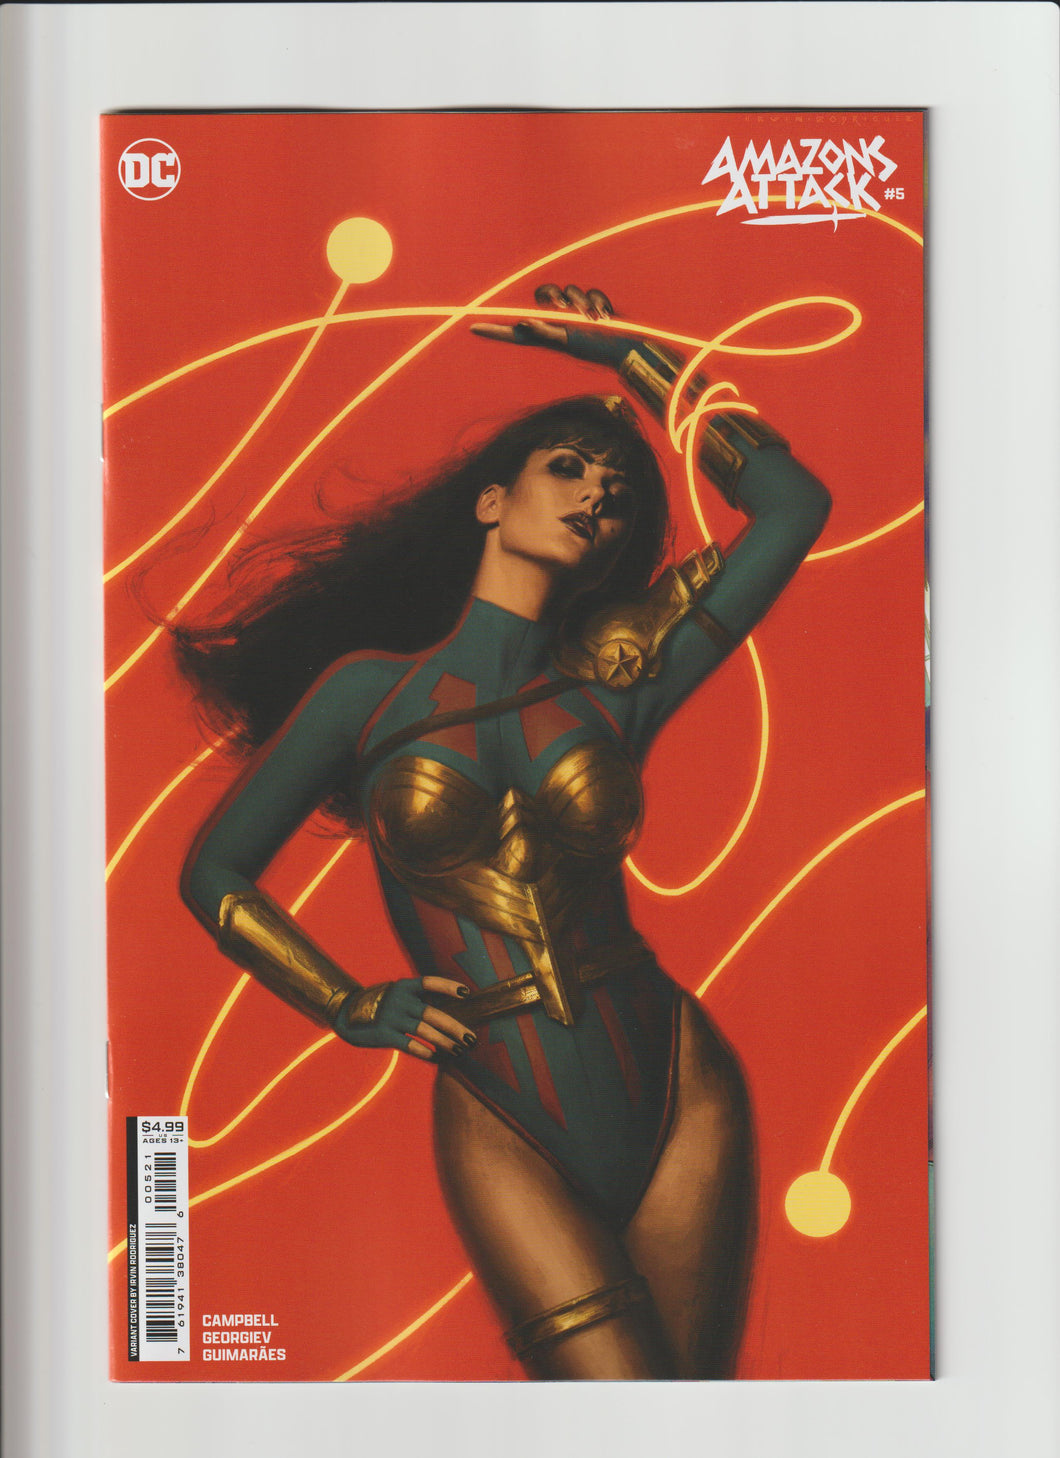 AMAZONS ATTACK #5 IRVIN RODRIGUEZ VARIANT